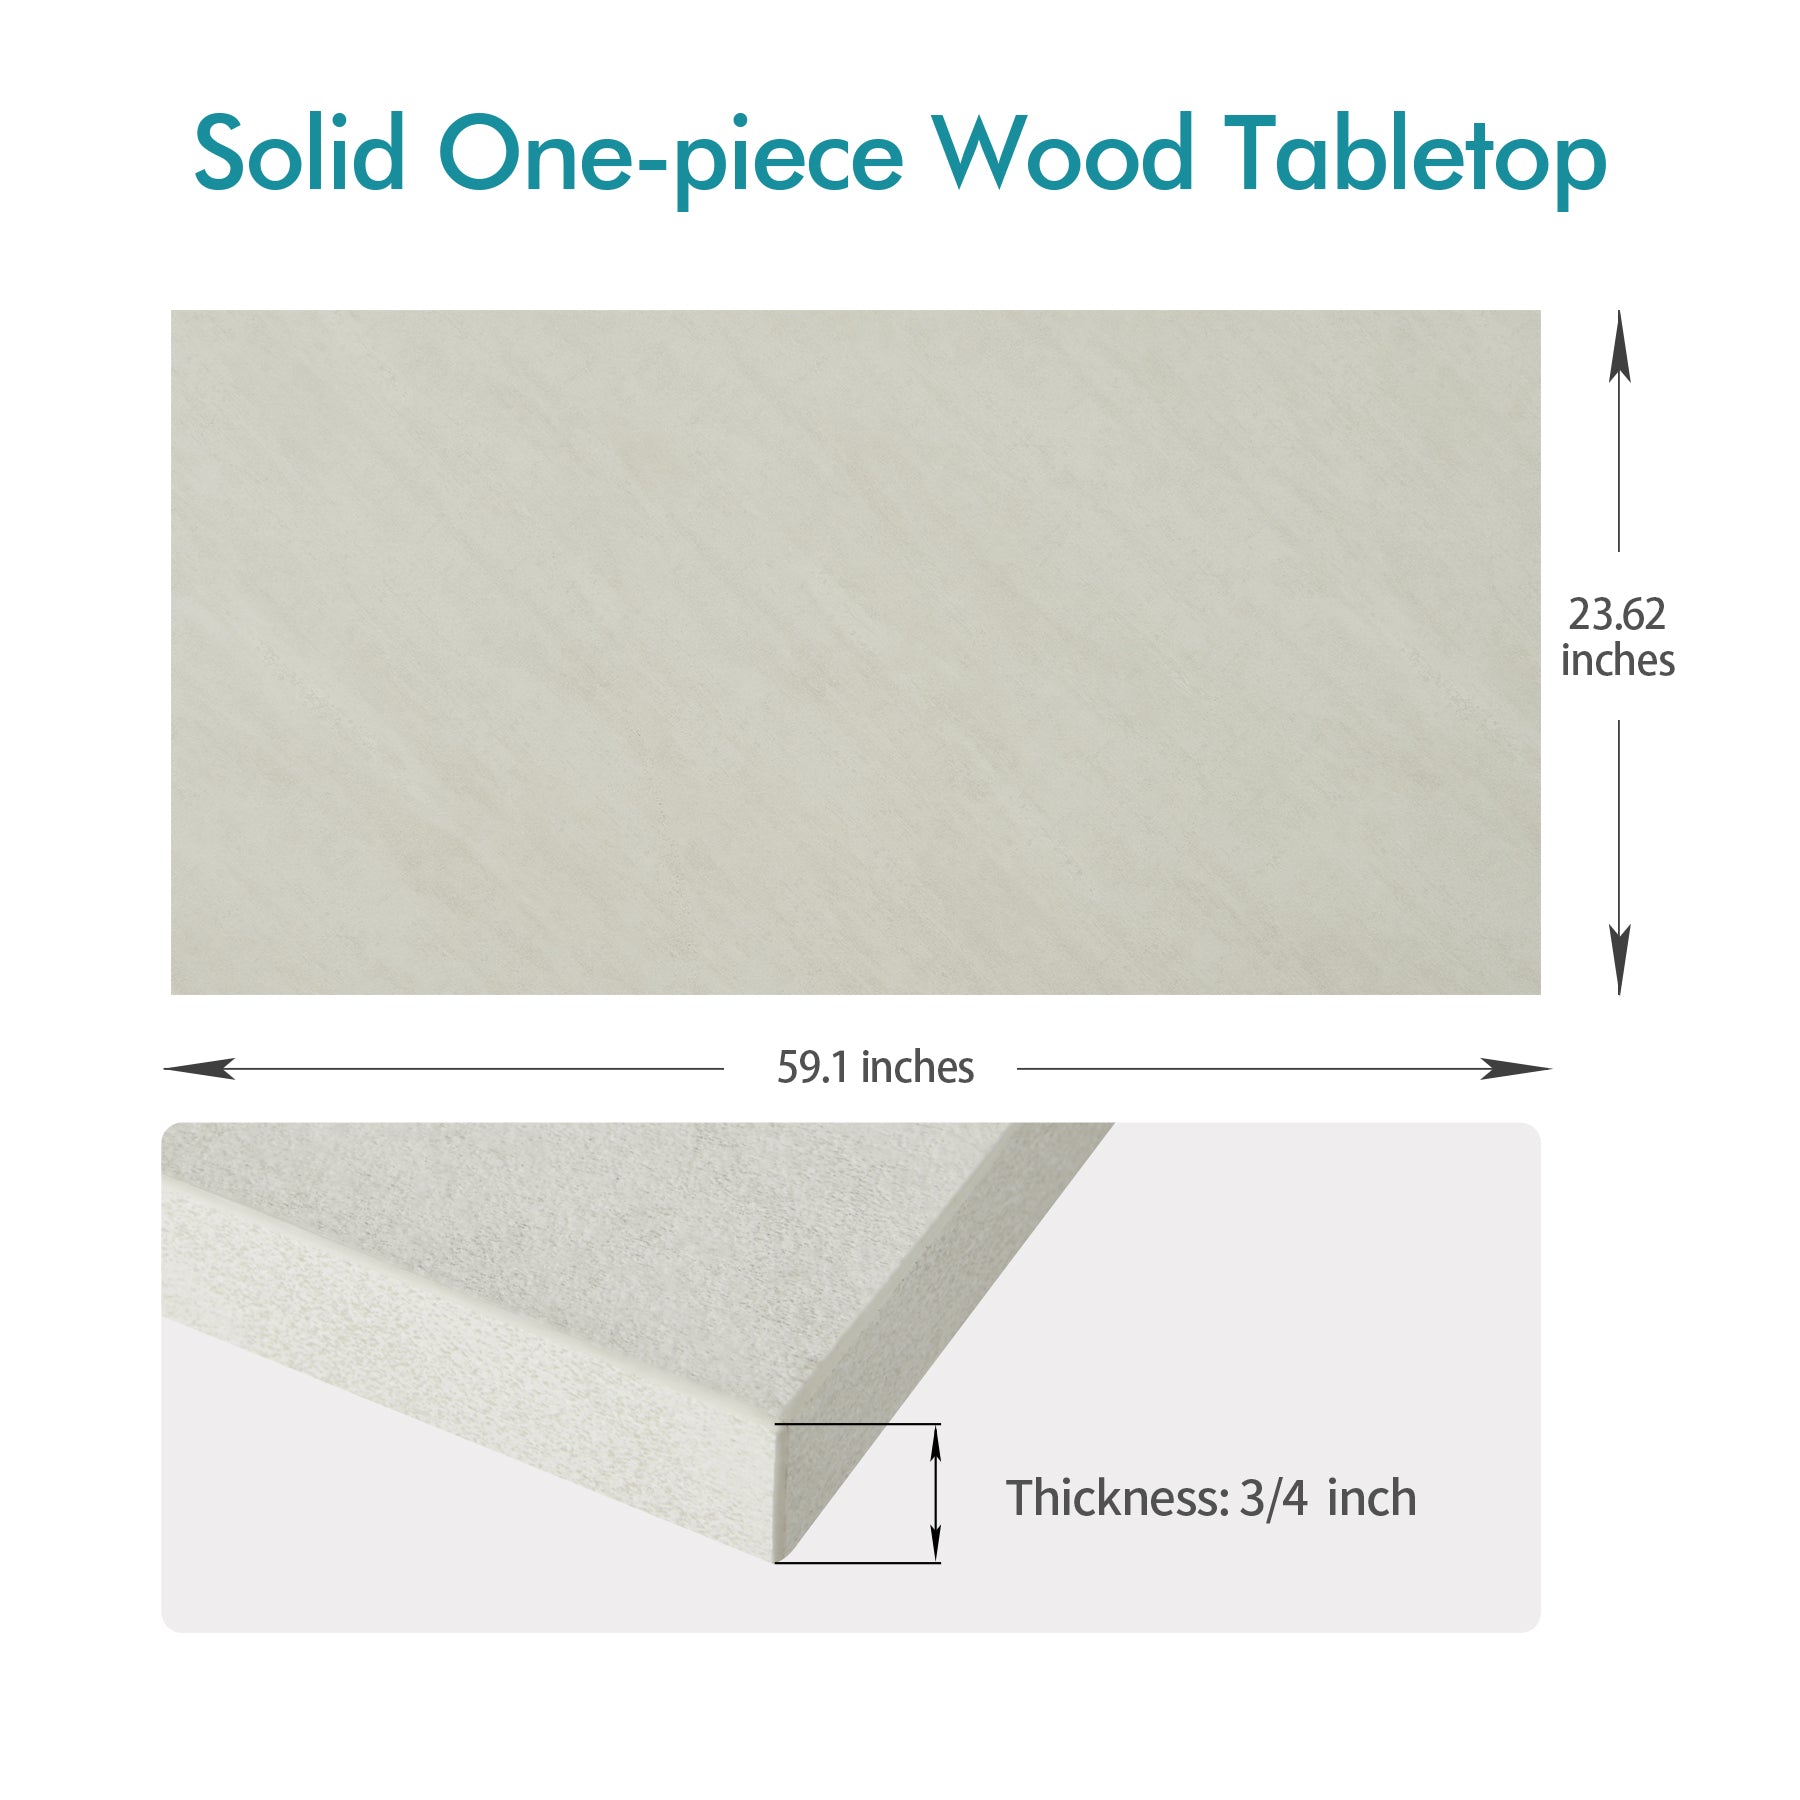 60x24 one-piece wood table top in white